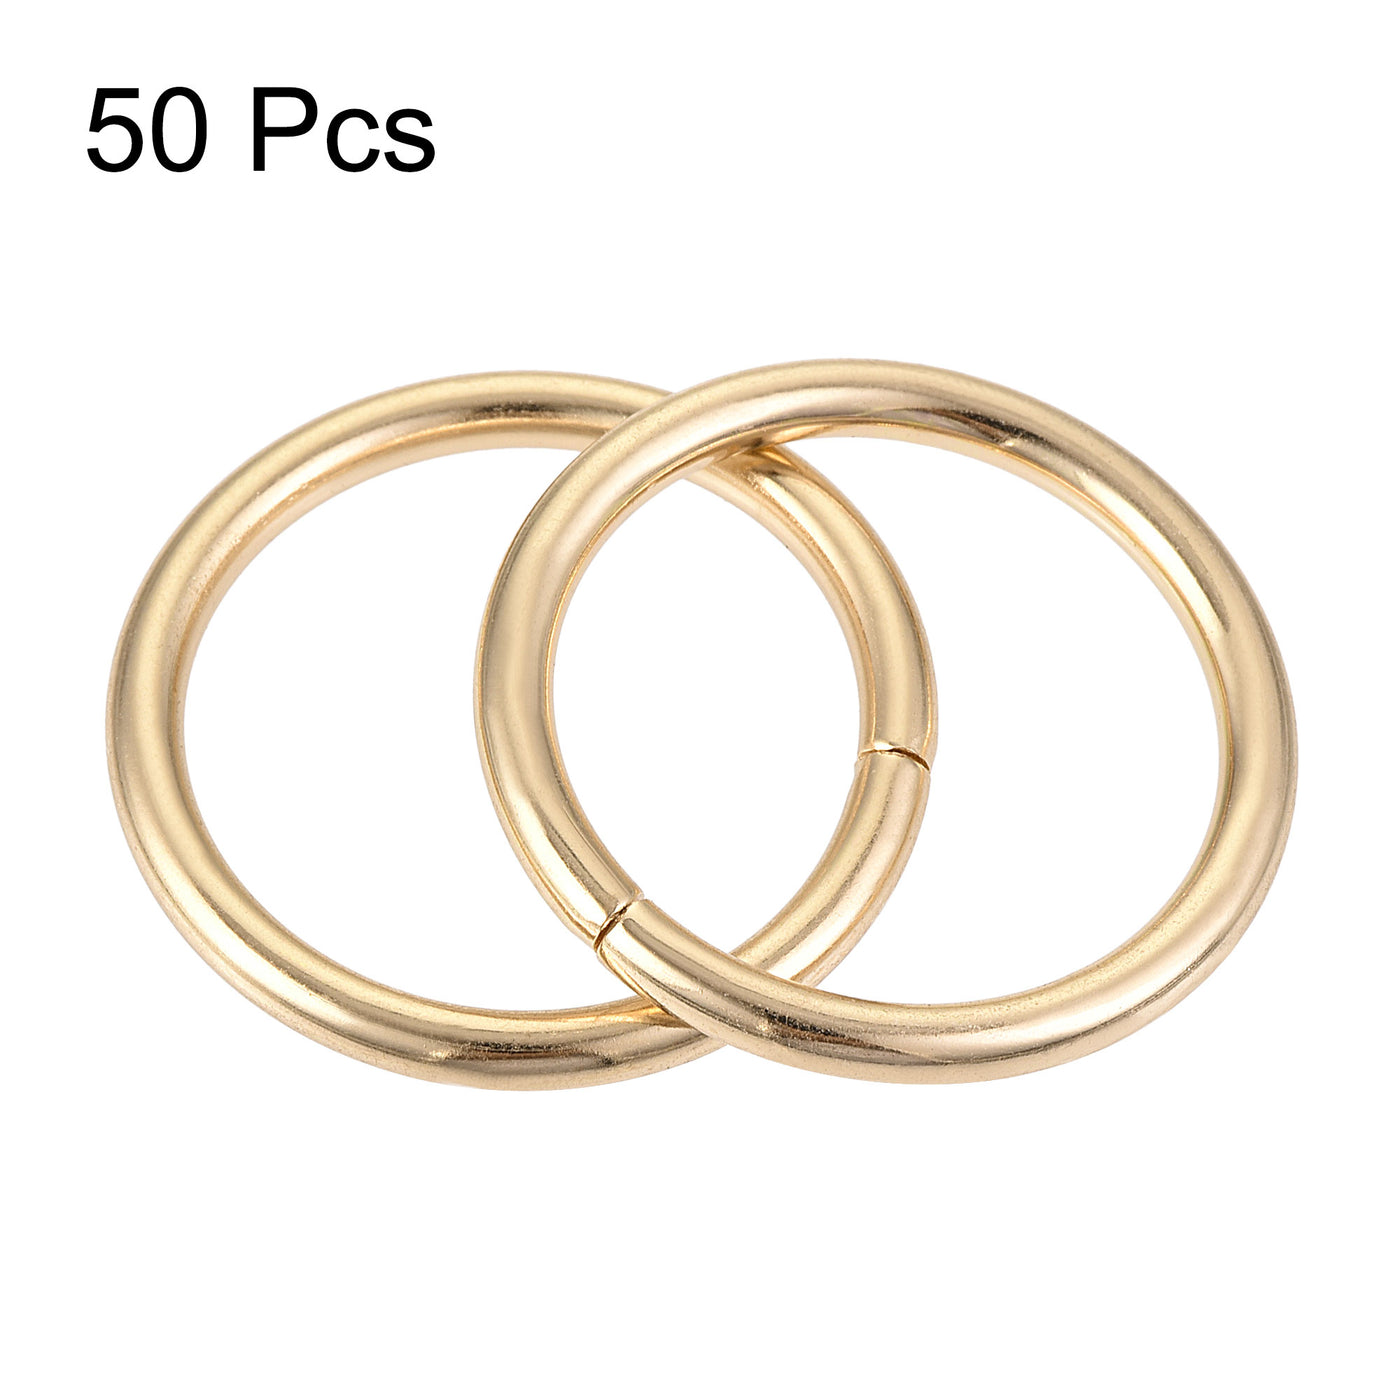 uxcell Uxcell 25mm Metal O Rings Non-Welded for Straps Bags Belts DIY Gold Tone 50pcs